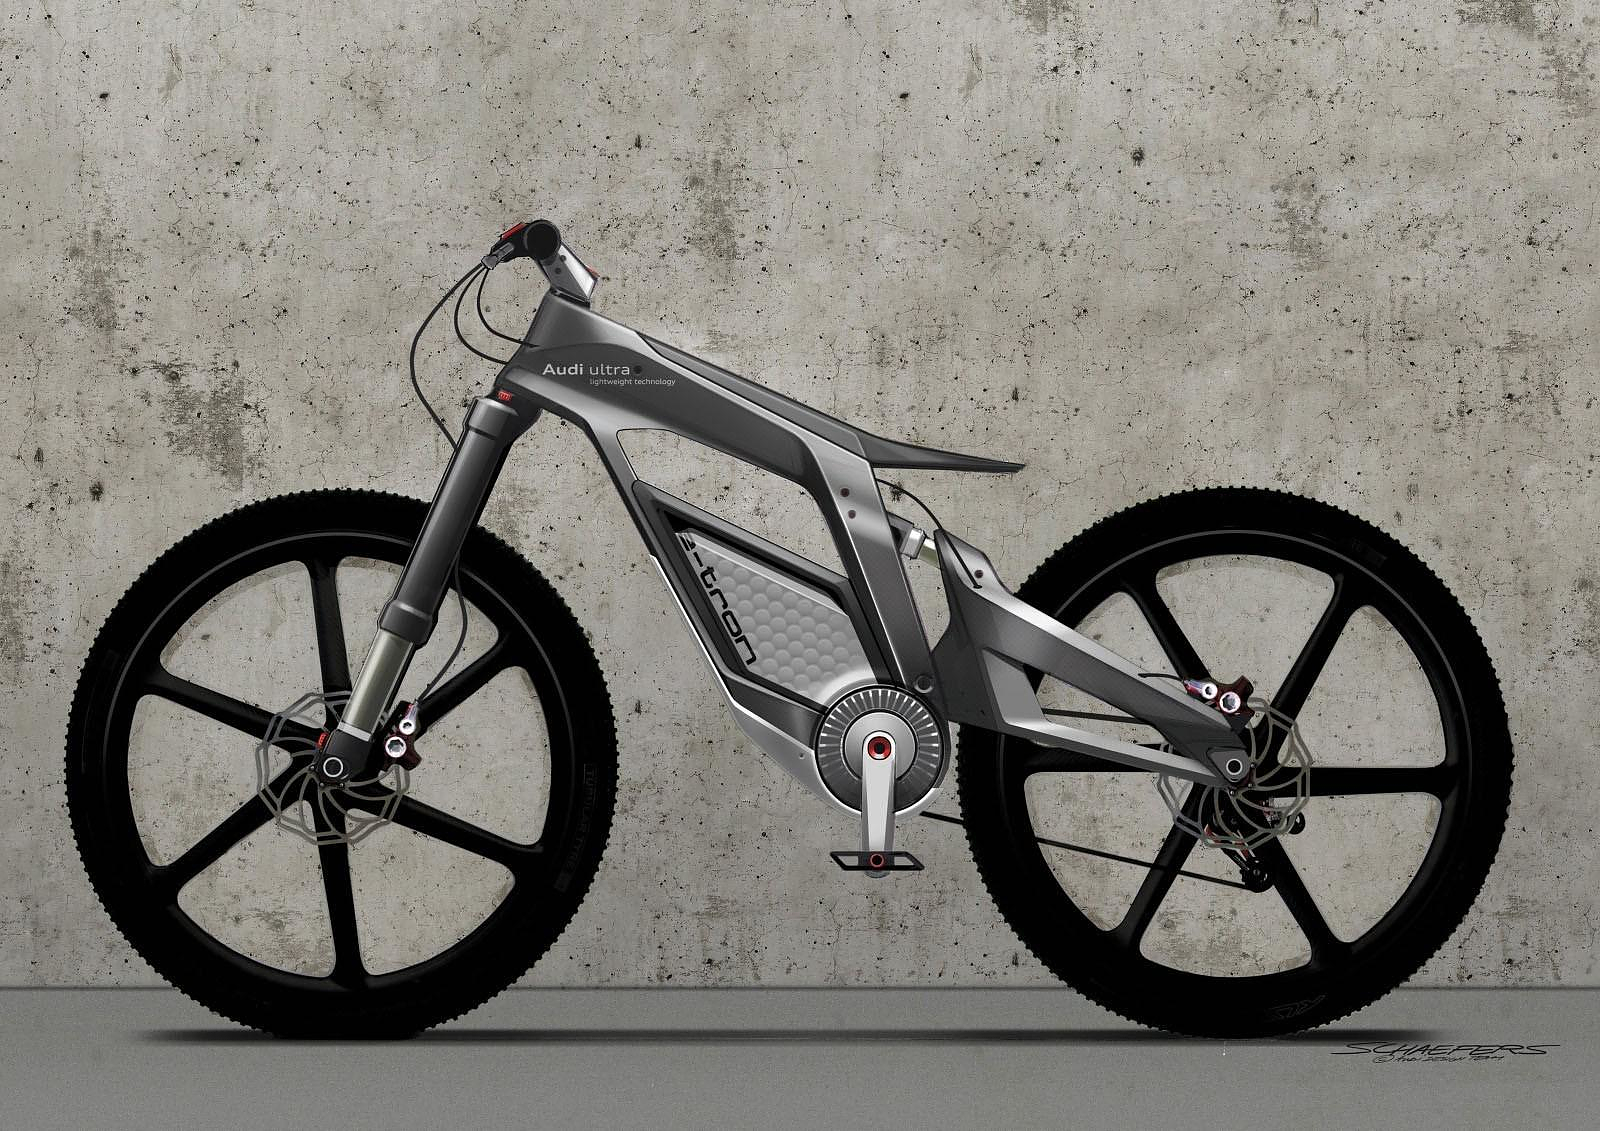 Download Audi e-bike Wörthersee. - Design Is This